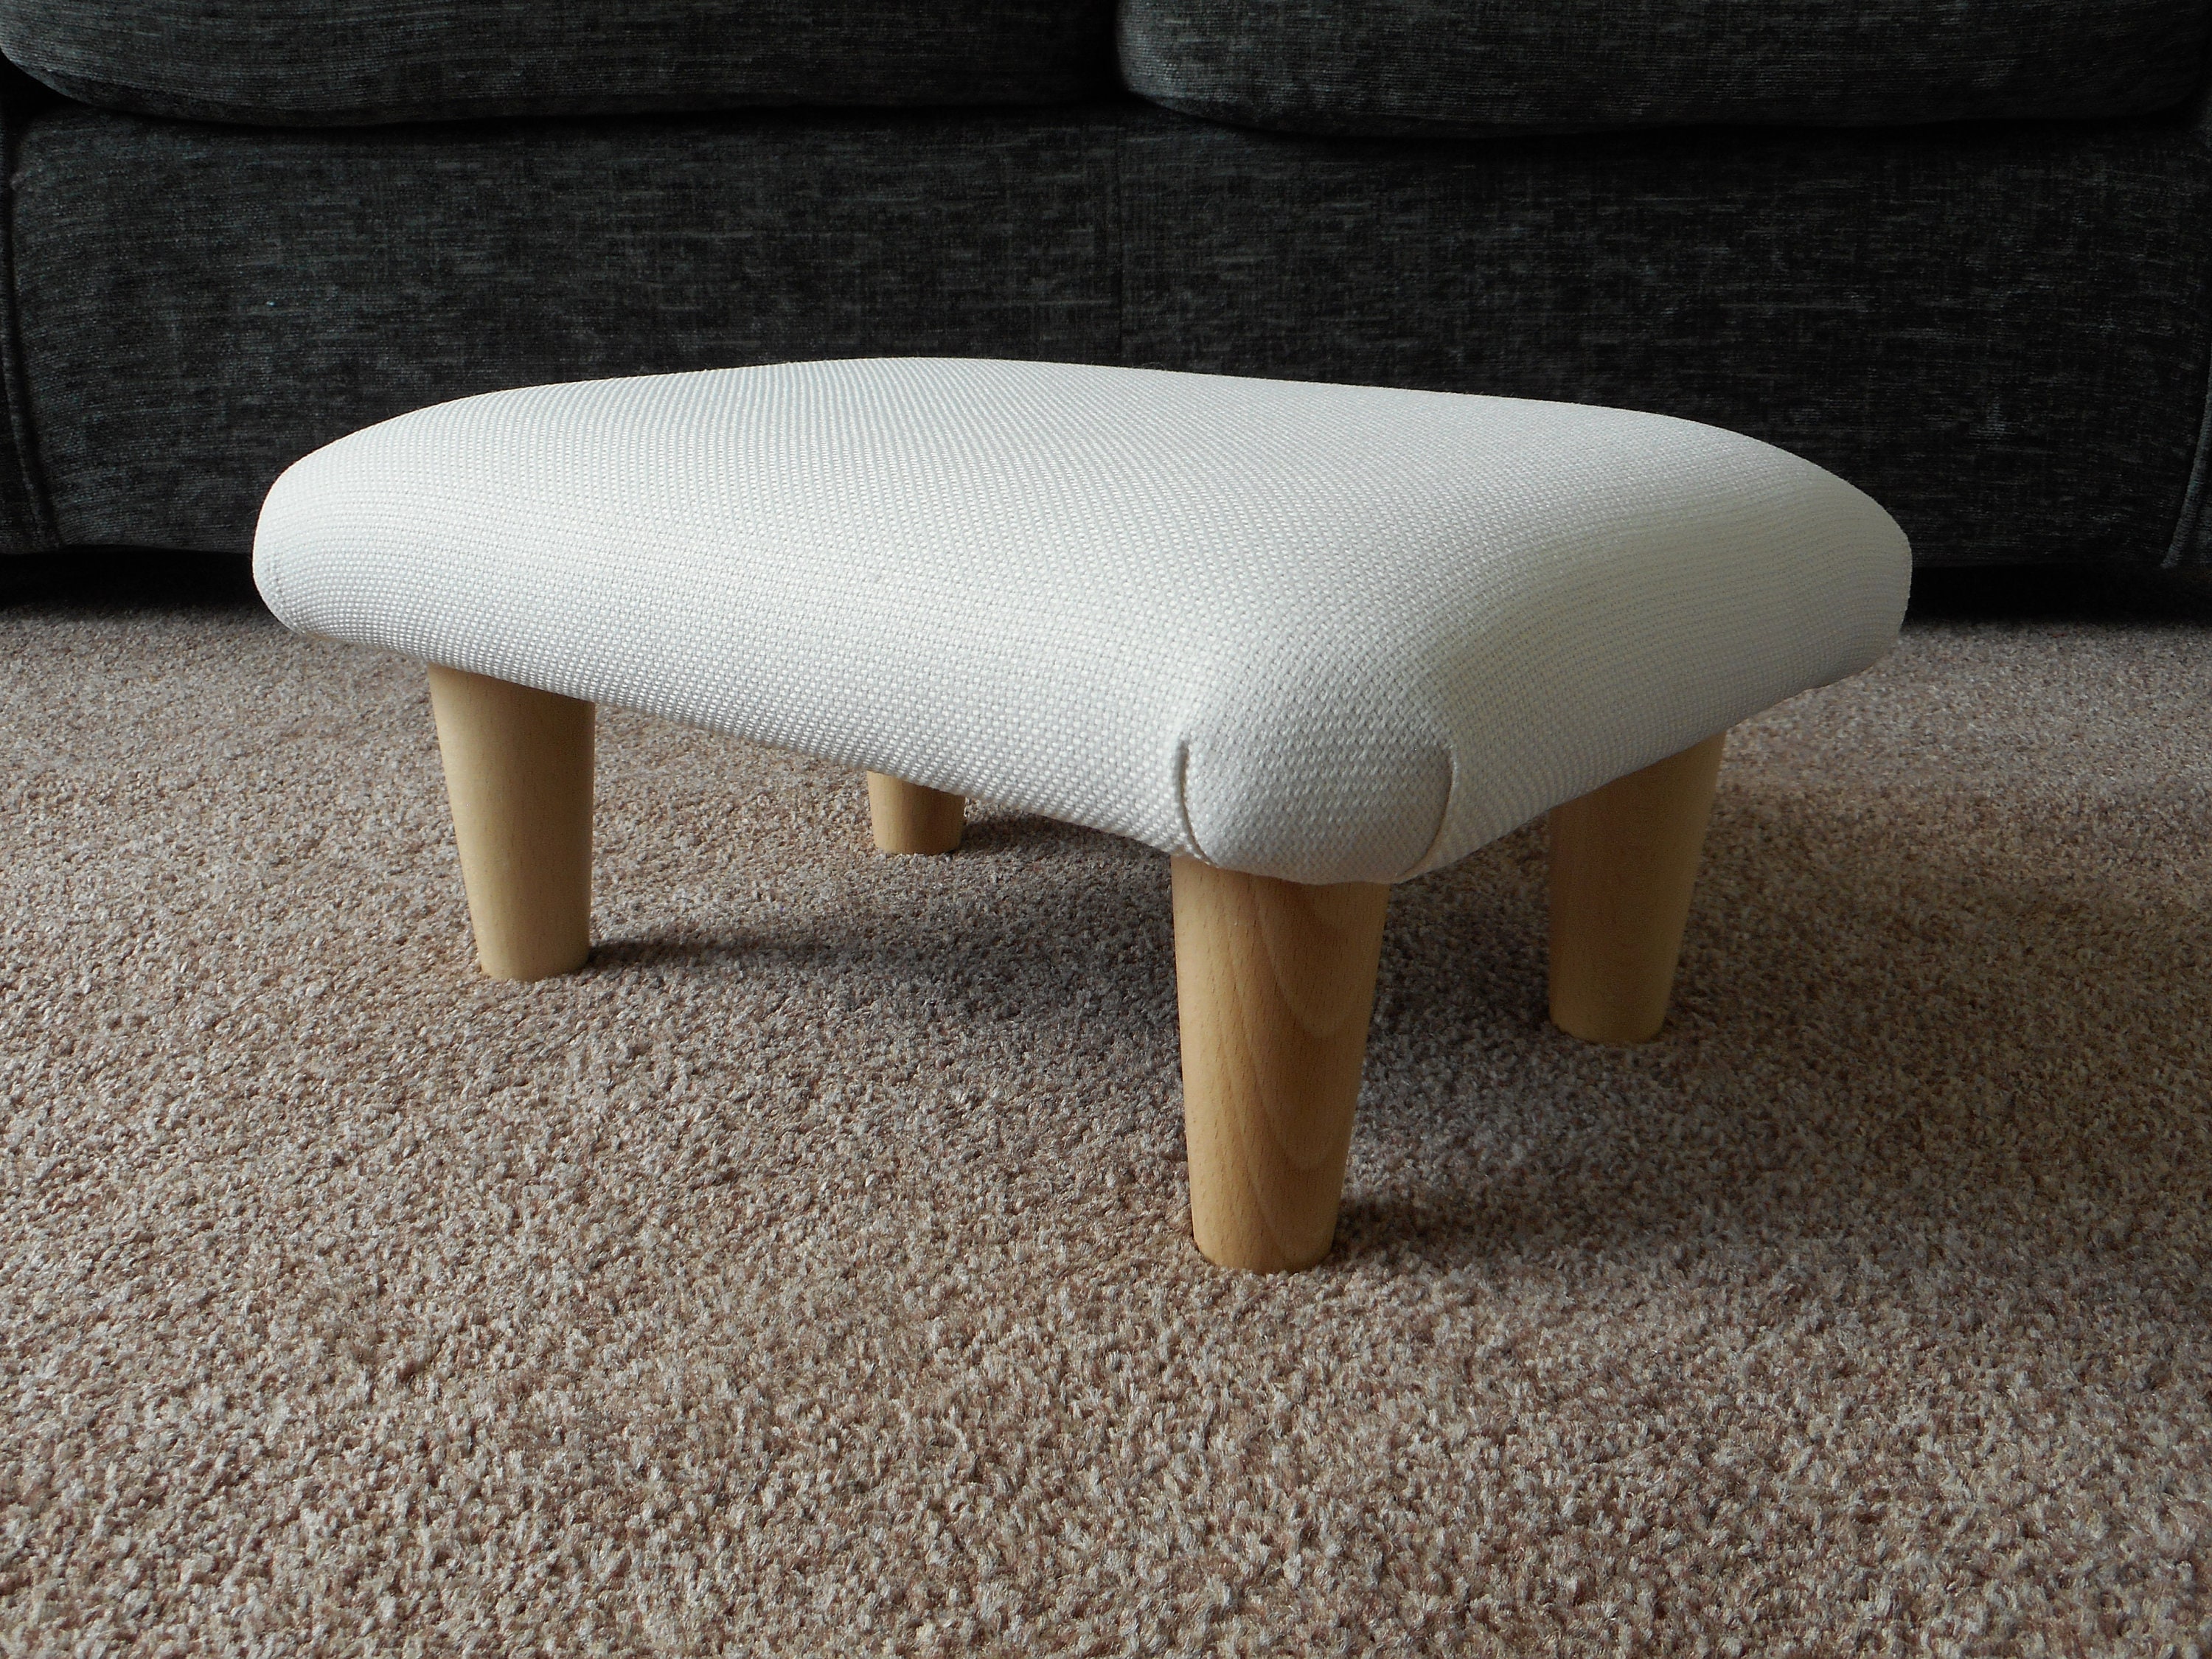 White Natural Plain 10-26 Cm Small Footstool With Wooden or Plastic Feet /  Upholstered Stool Under Desk Office / Handmade Footrest Bed Step 